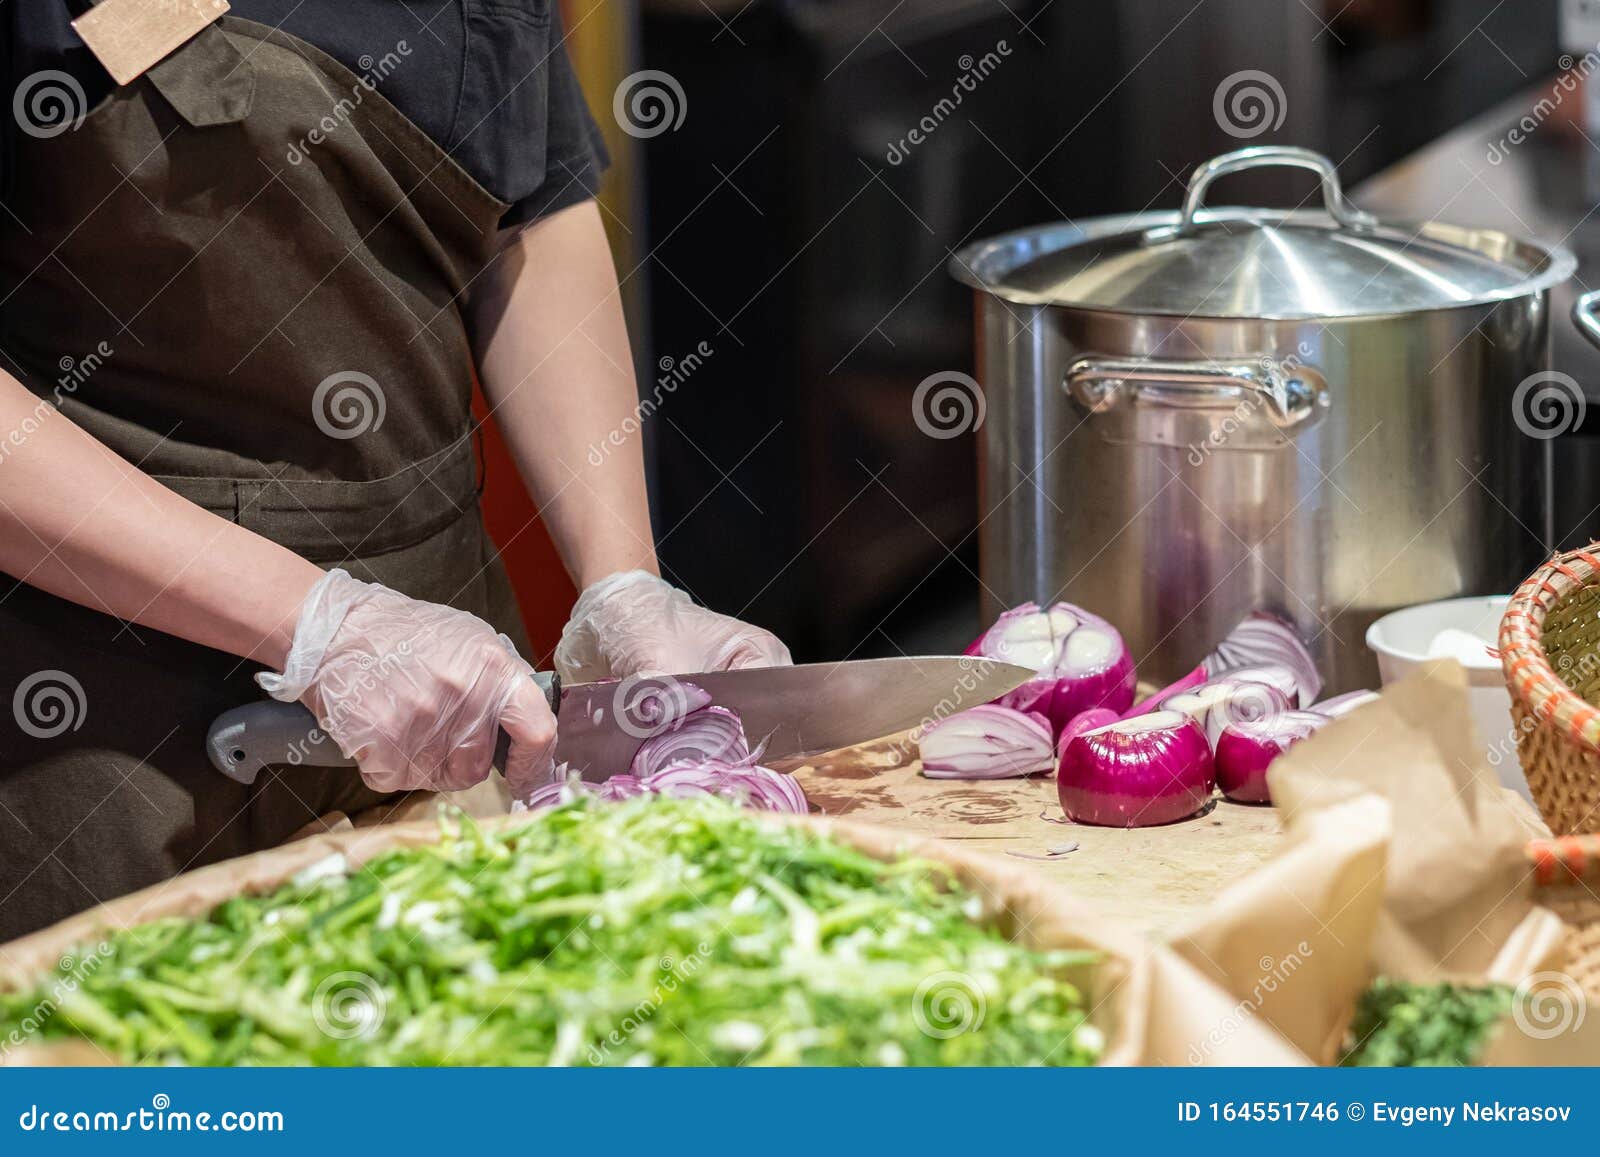 https://thumbs.dreamstime.com/z/cook-s-hands-cellophane-gloves-cutting-red-onion-thin-slices-cooking-vegetable-ingredients-against-background-164551746.jpg